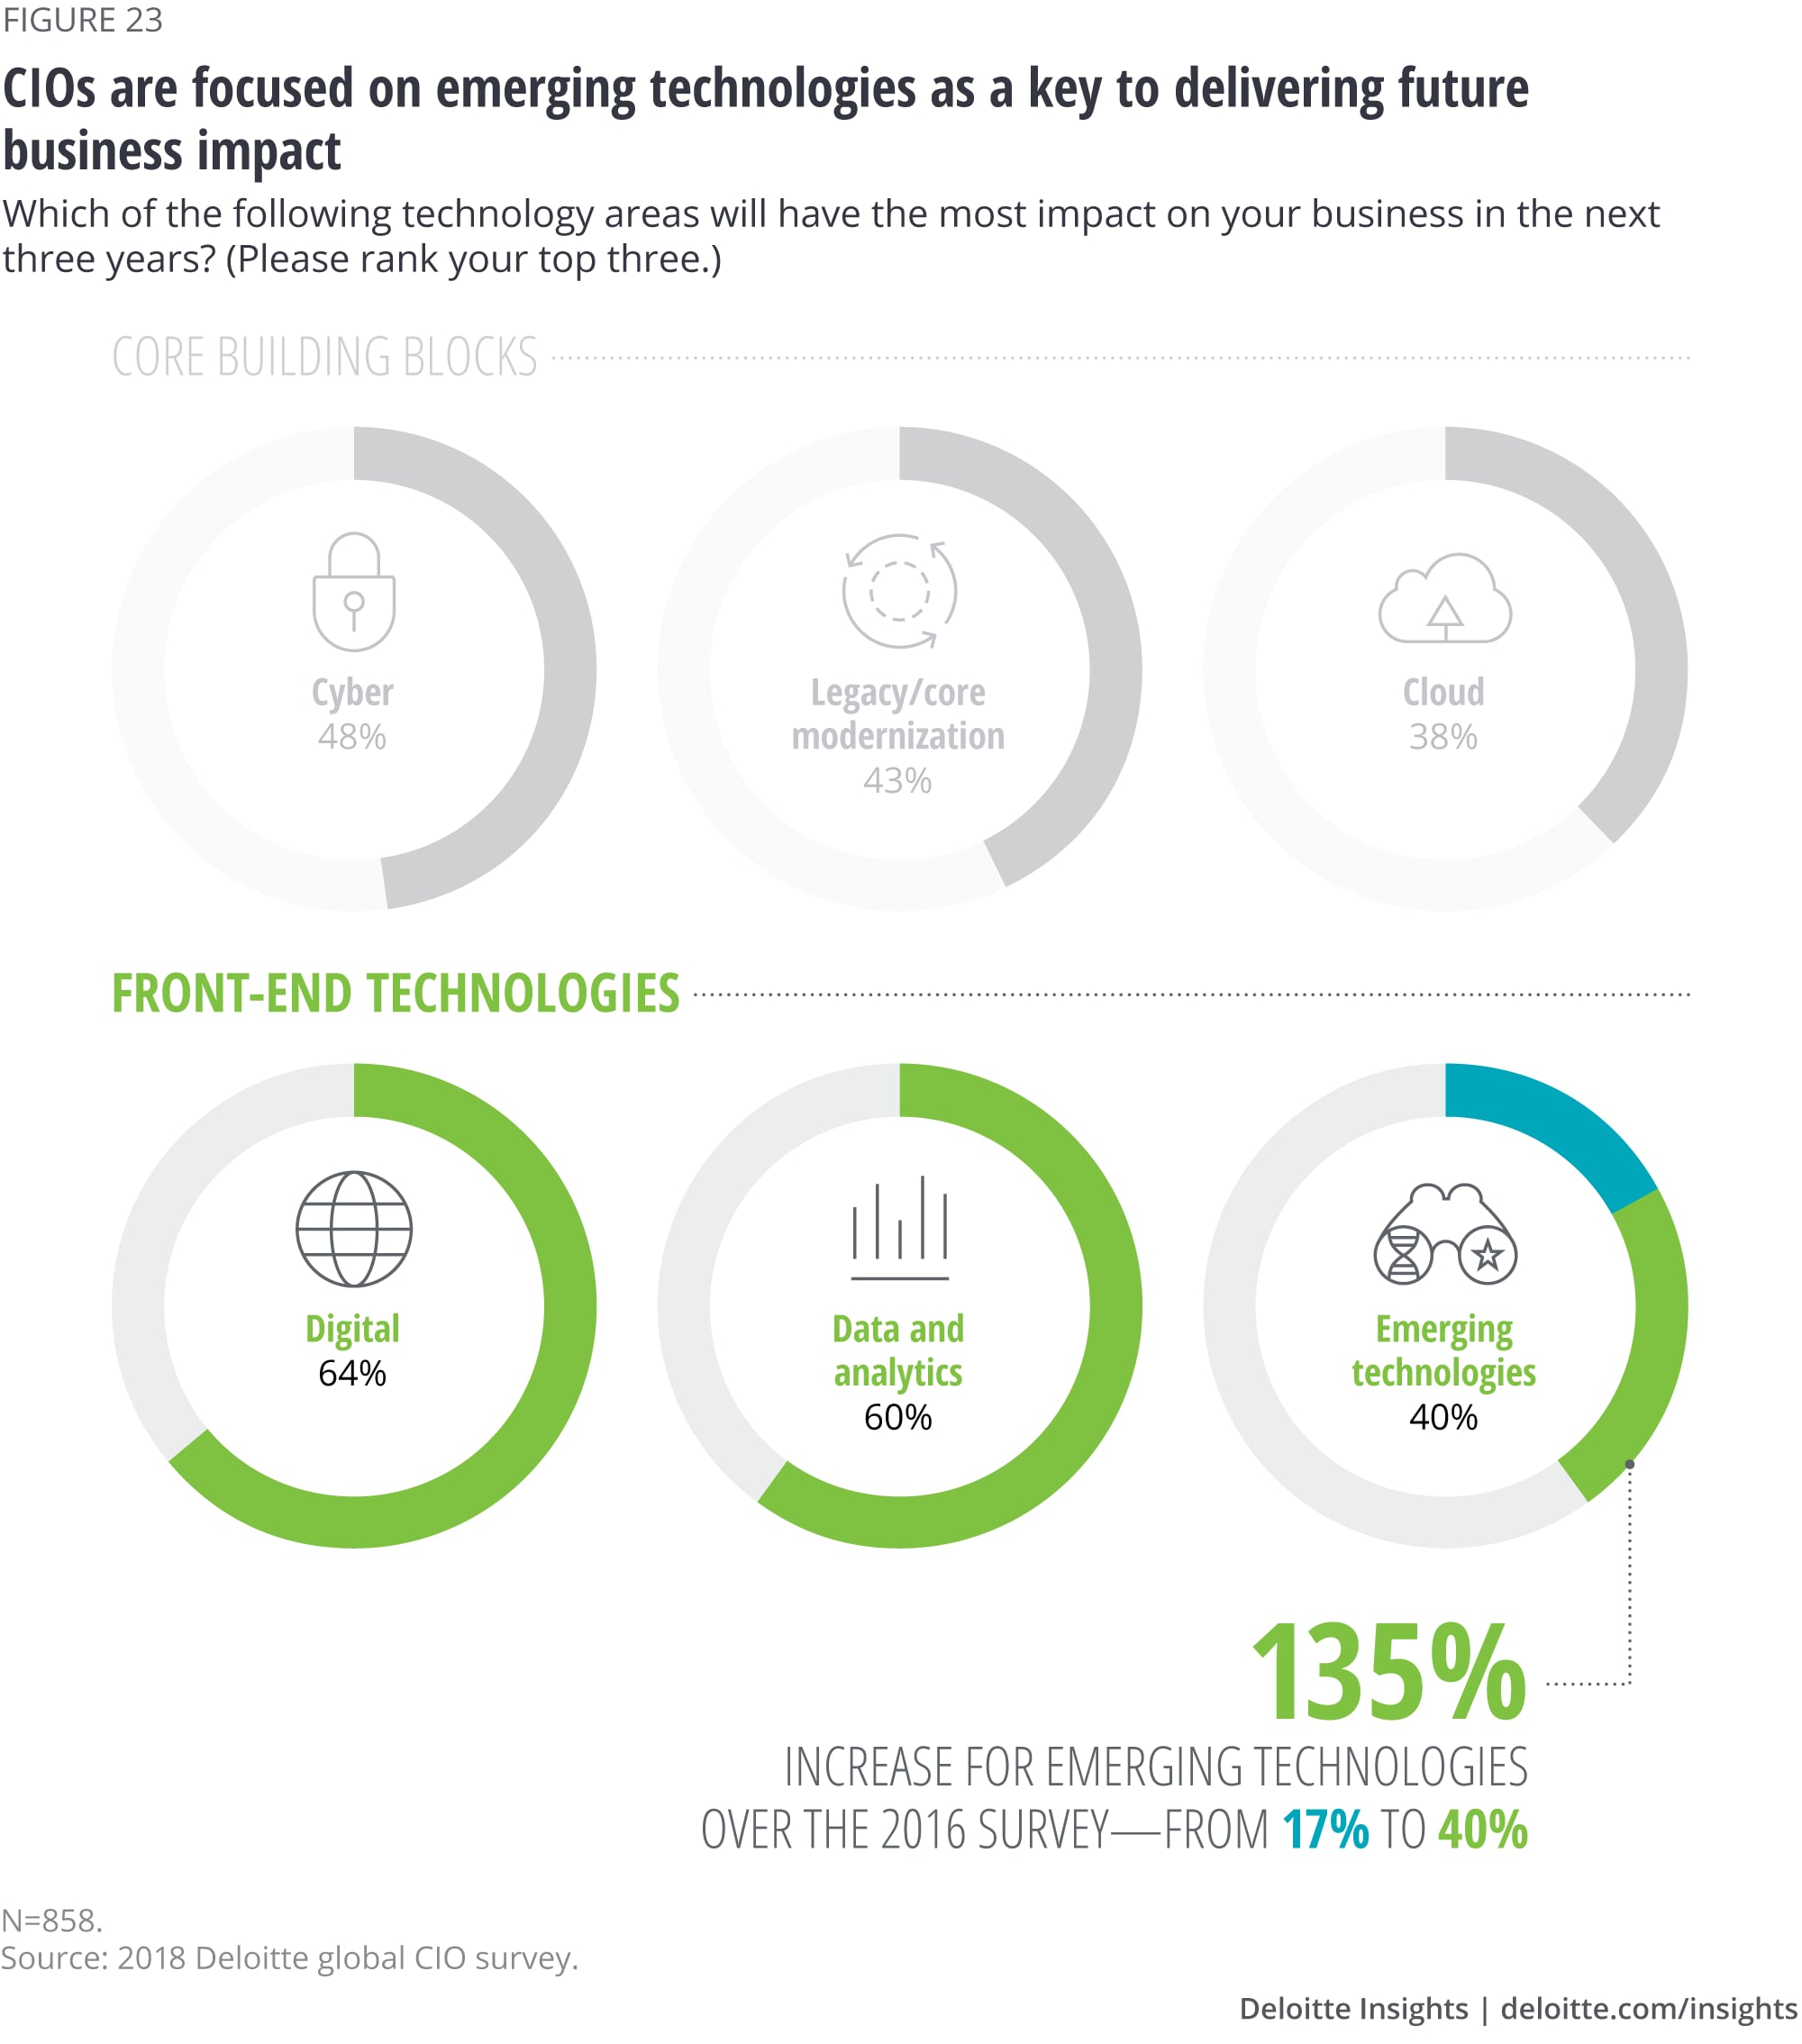 CIOs are focused on emerging technologies as a key to delivering future business impact